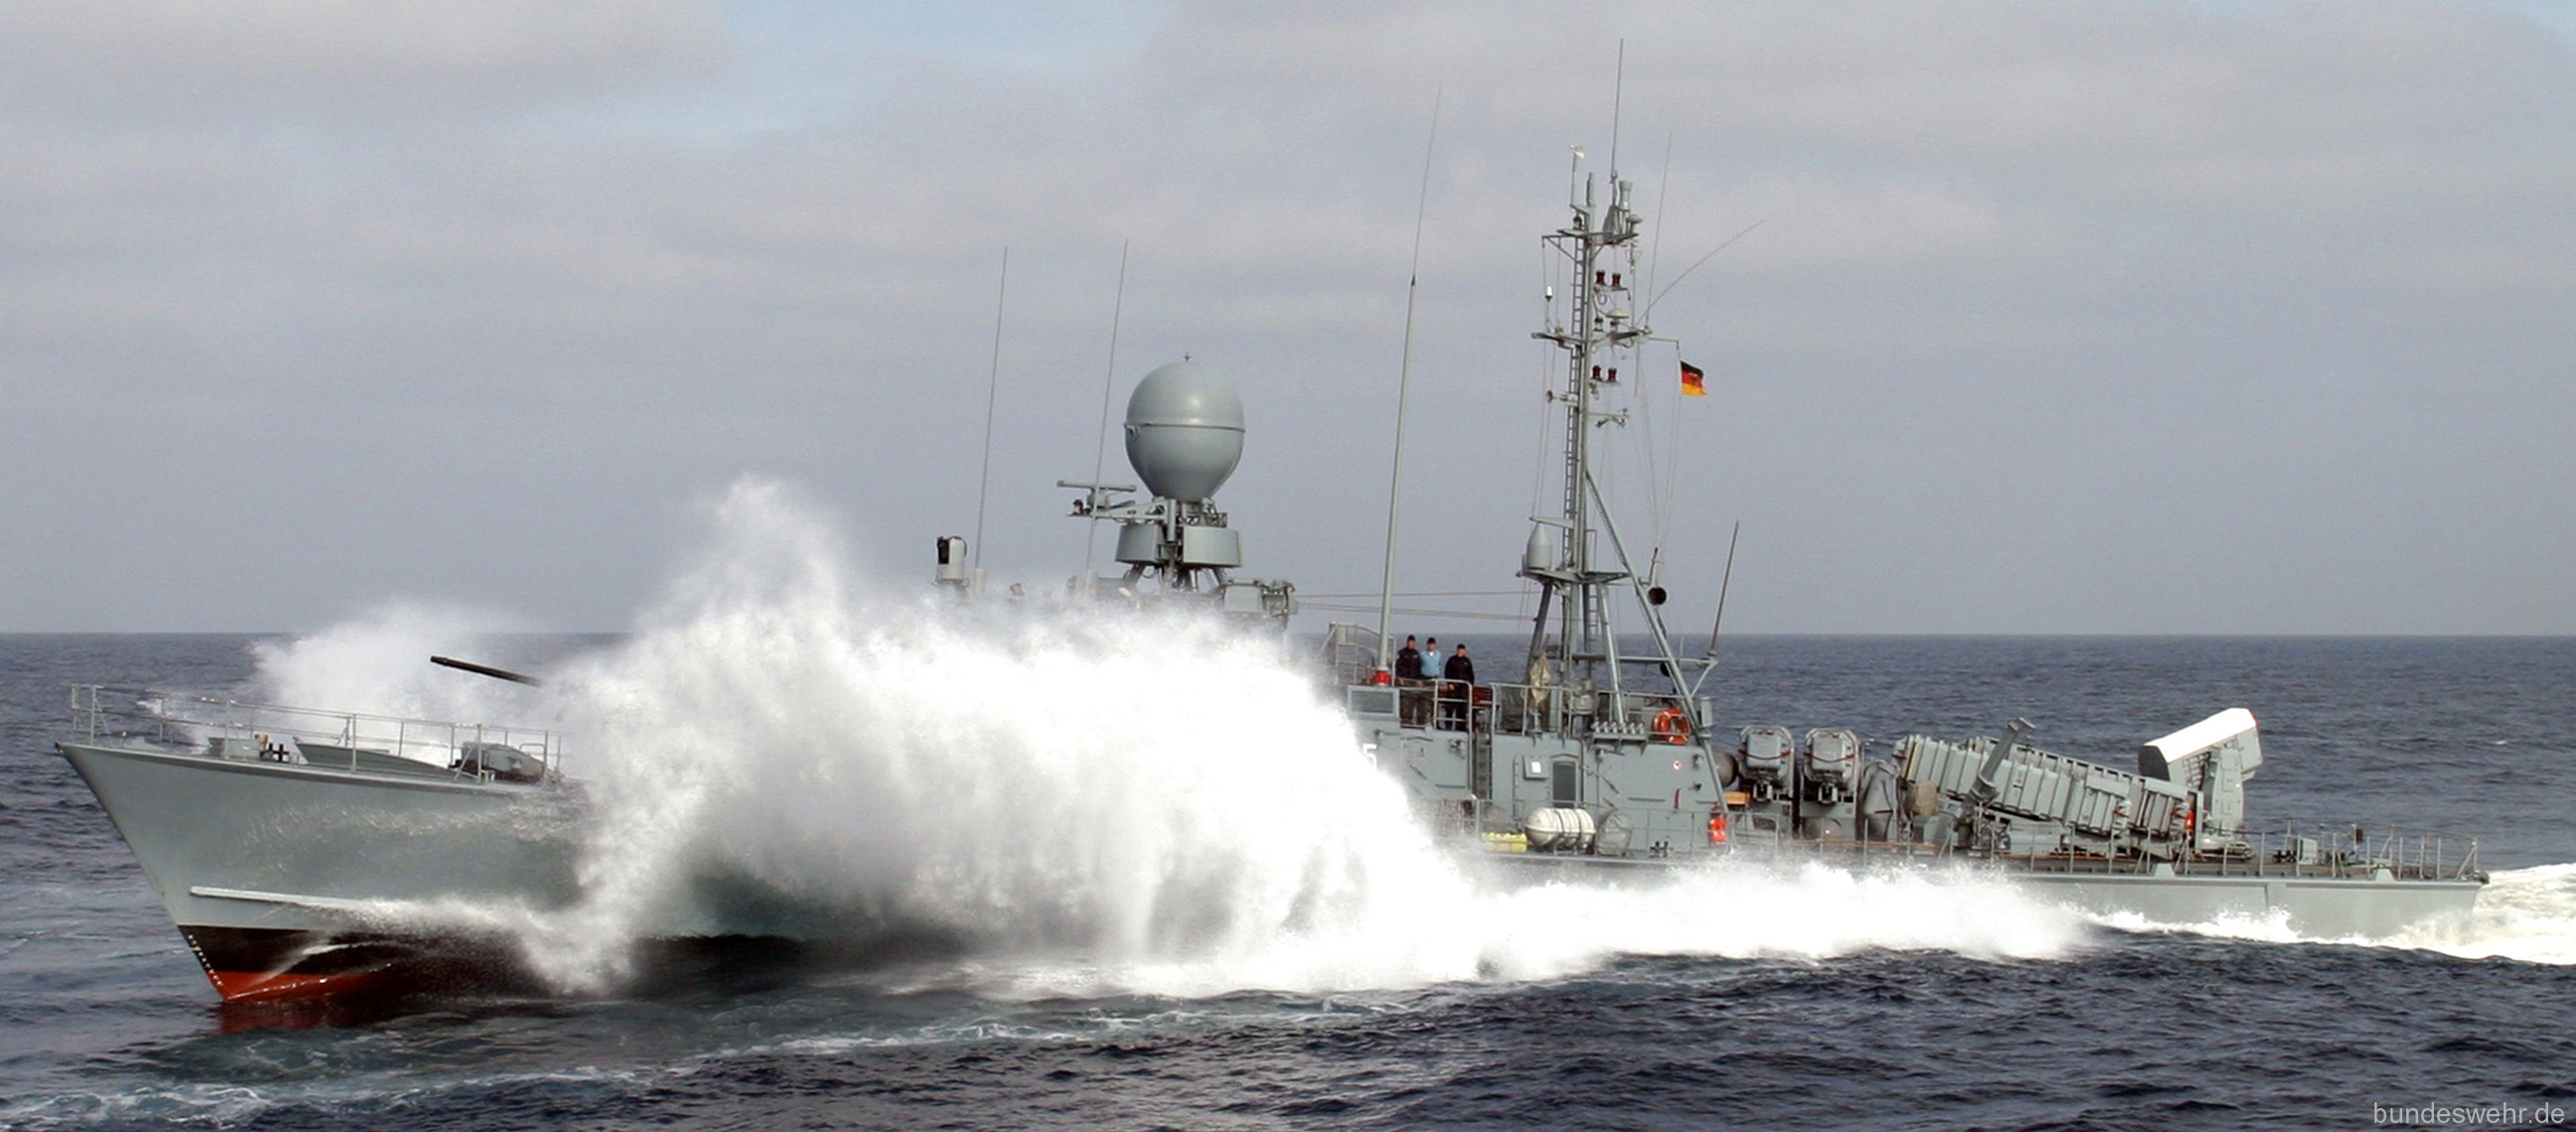 p6125 s75 fgs zobel type 143a gepard class fast attack missile craft german navy 06